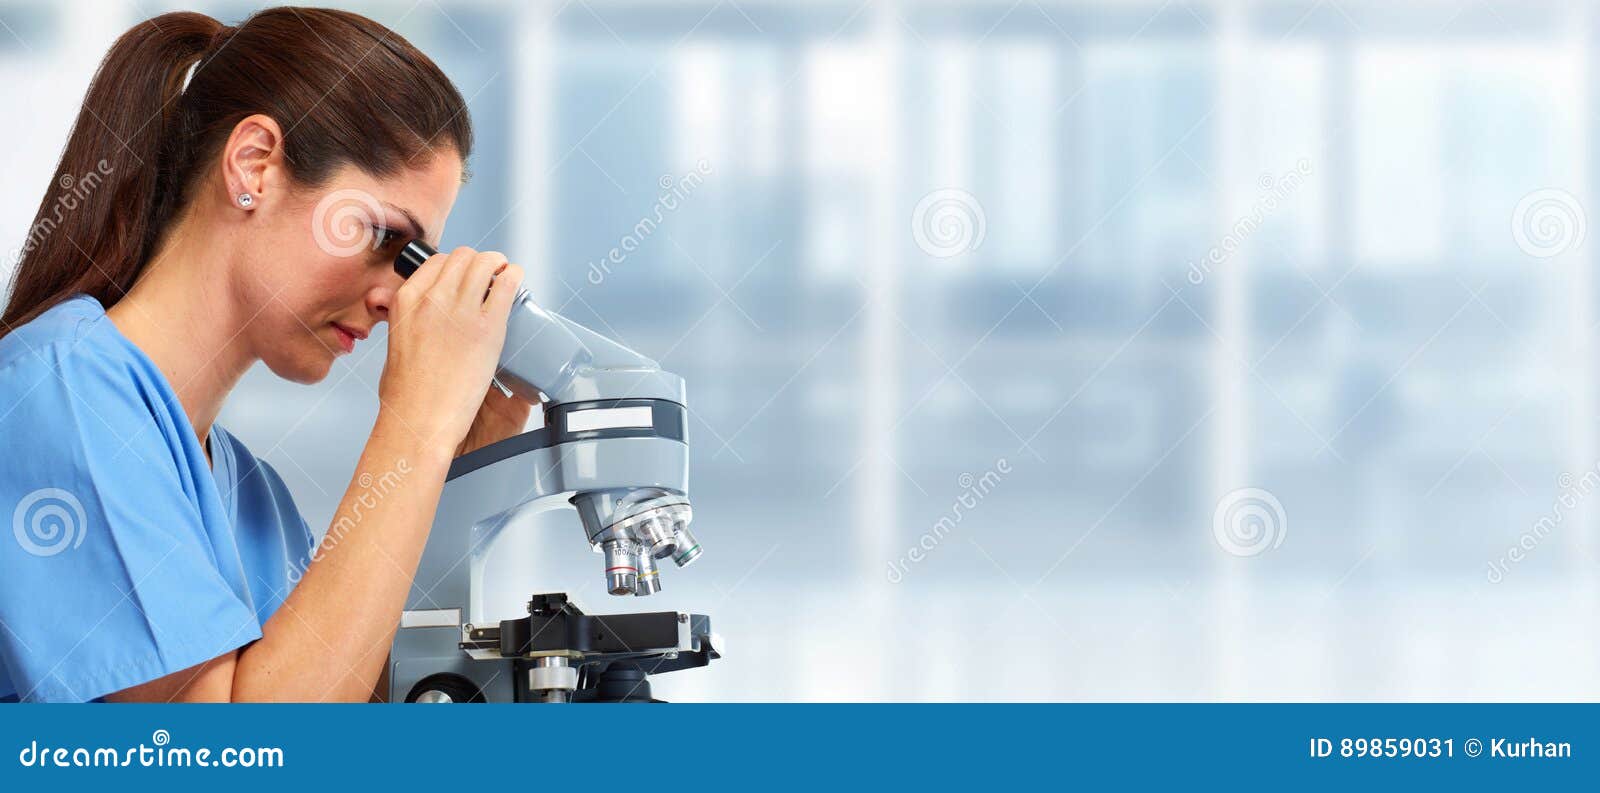 medical doctor with microscope